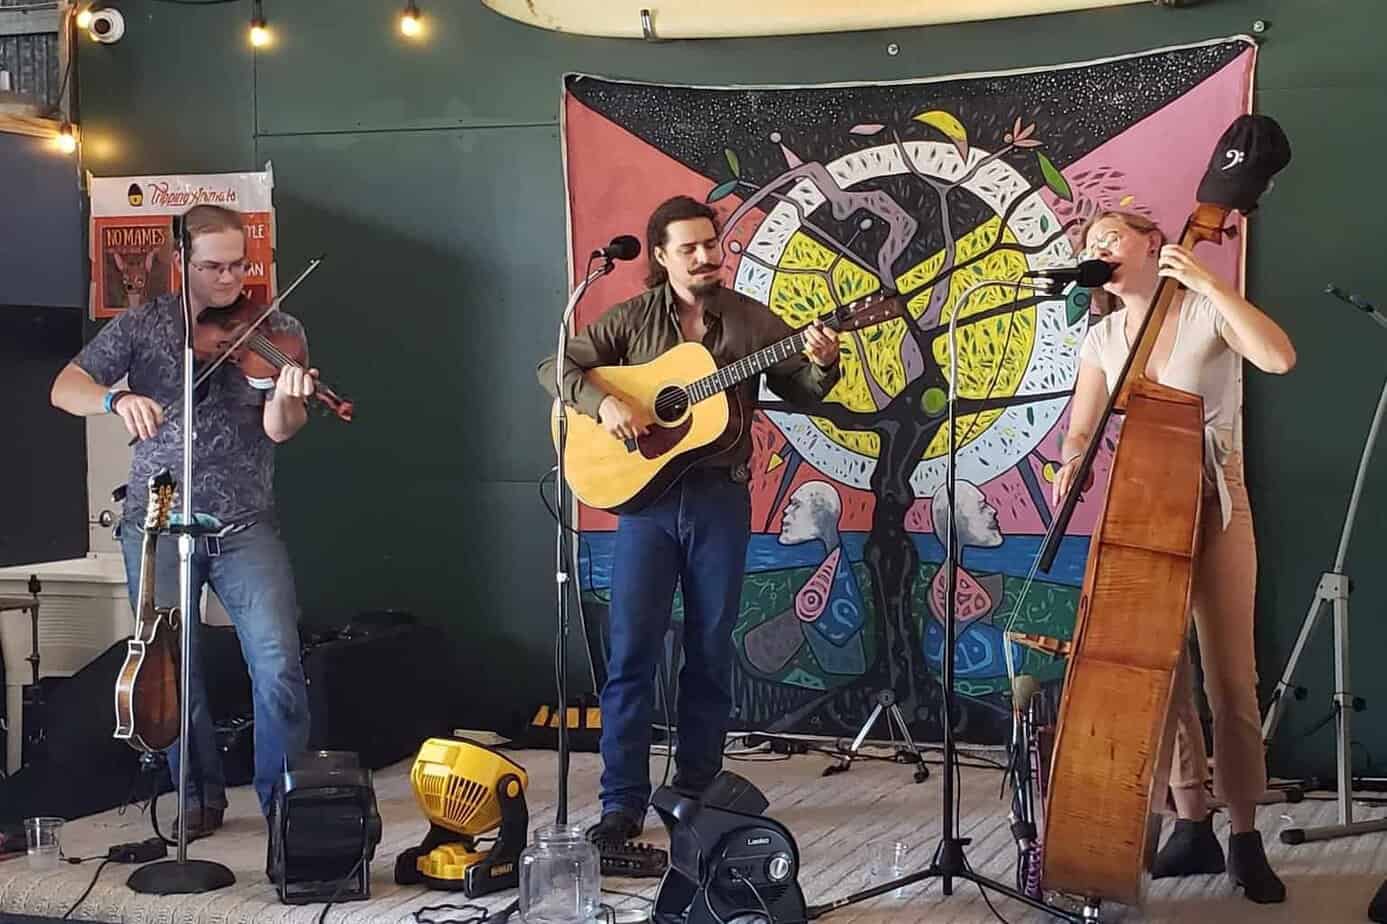 Bluegrass Jam hosted by Low Ground at Pierced Ciderworks